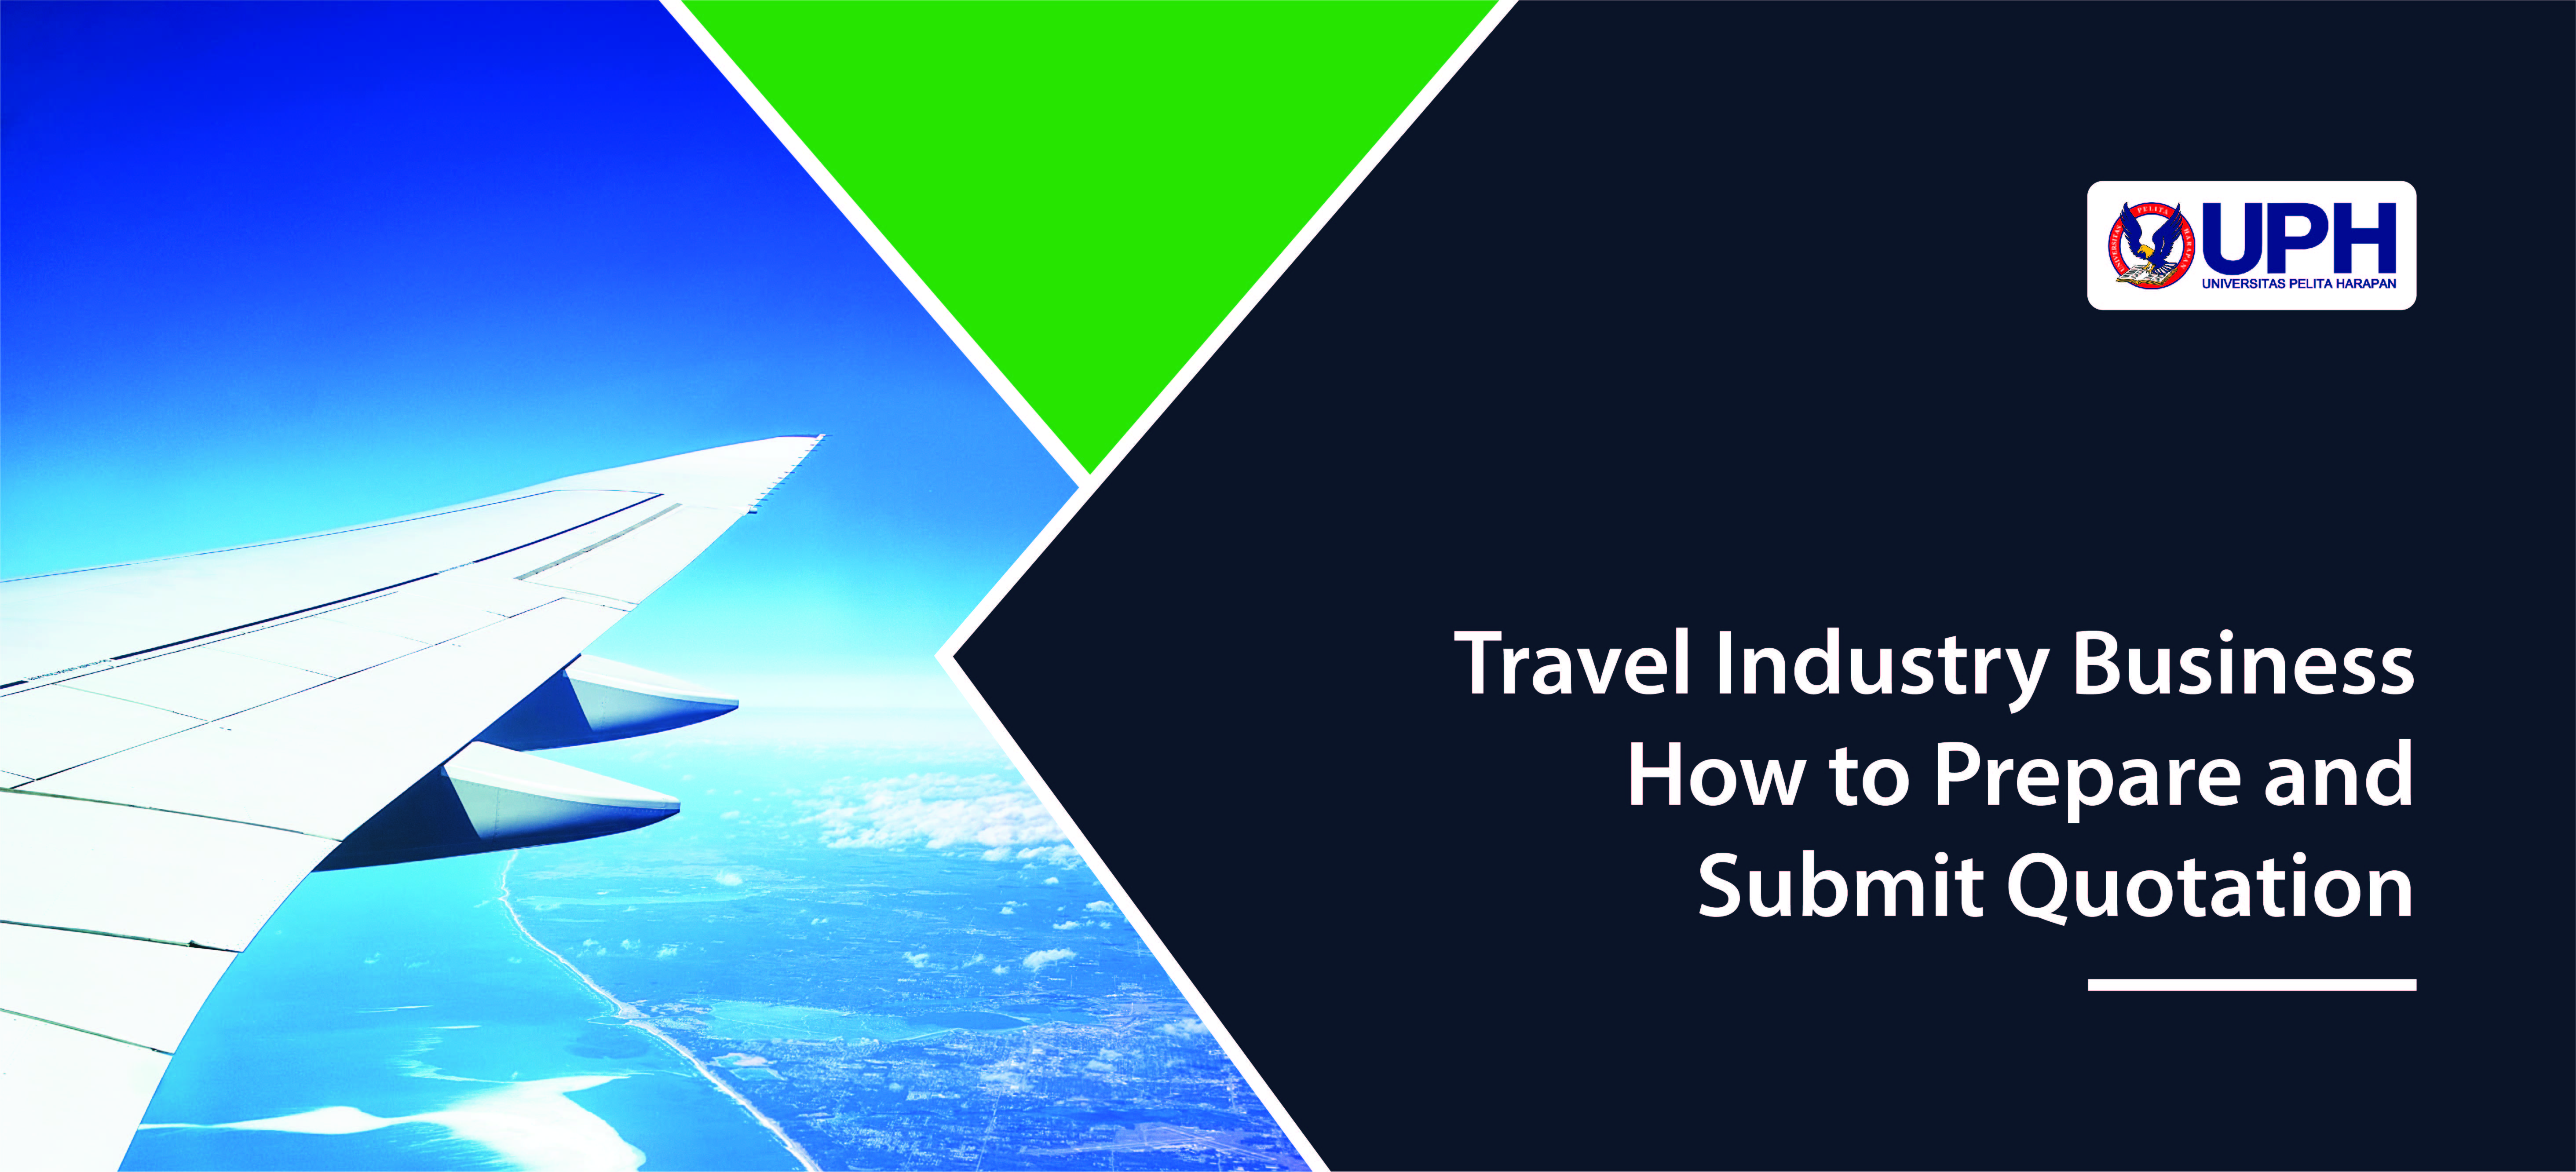 Travel Industry Business : How to Prepare and Submit Quotation - TRA4306